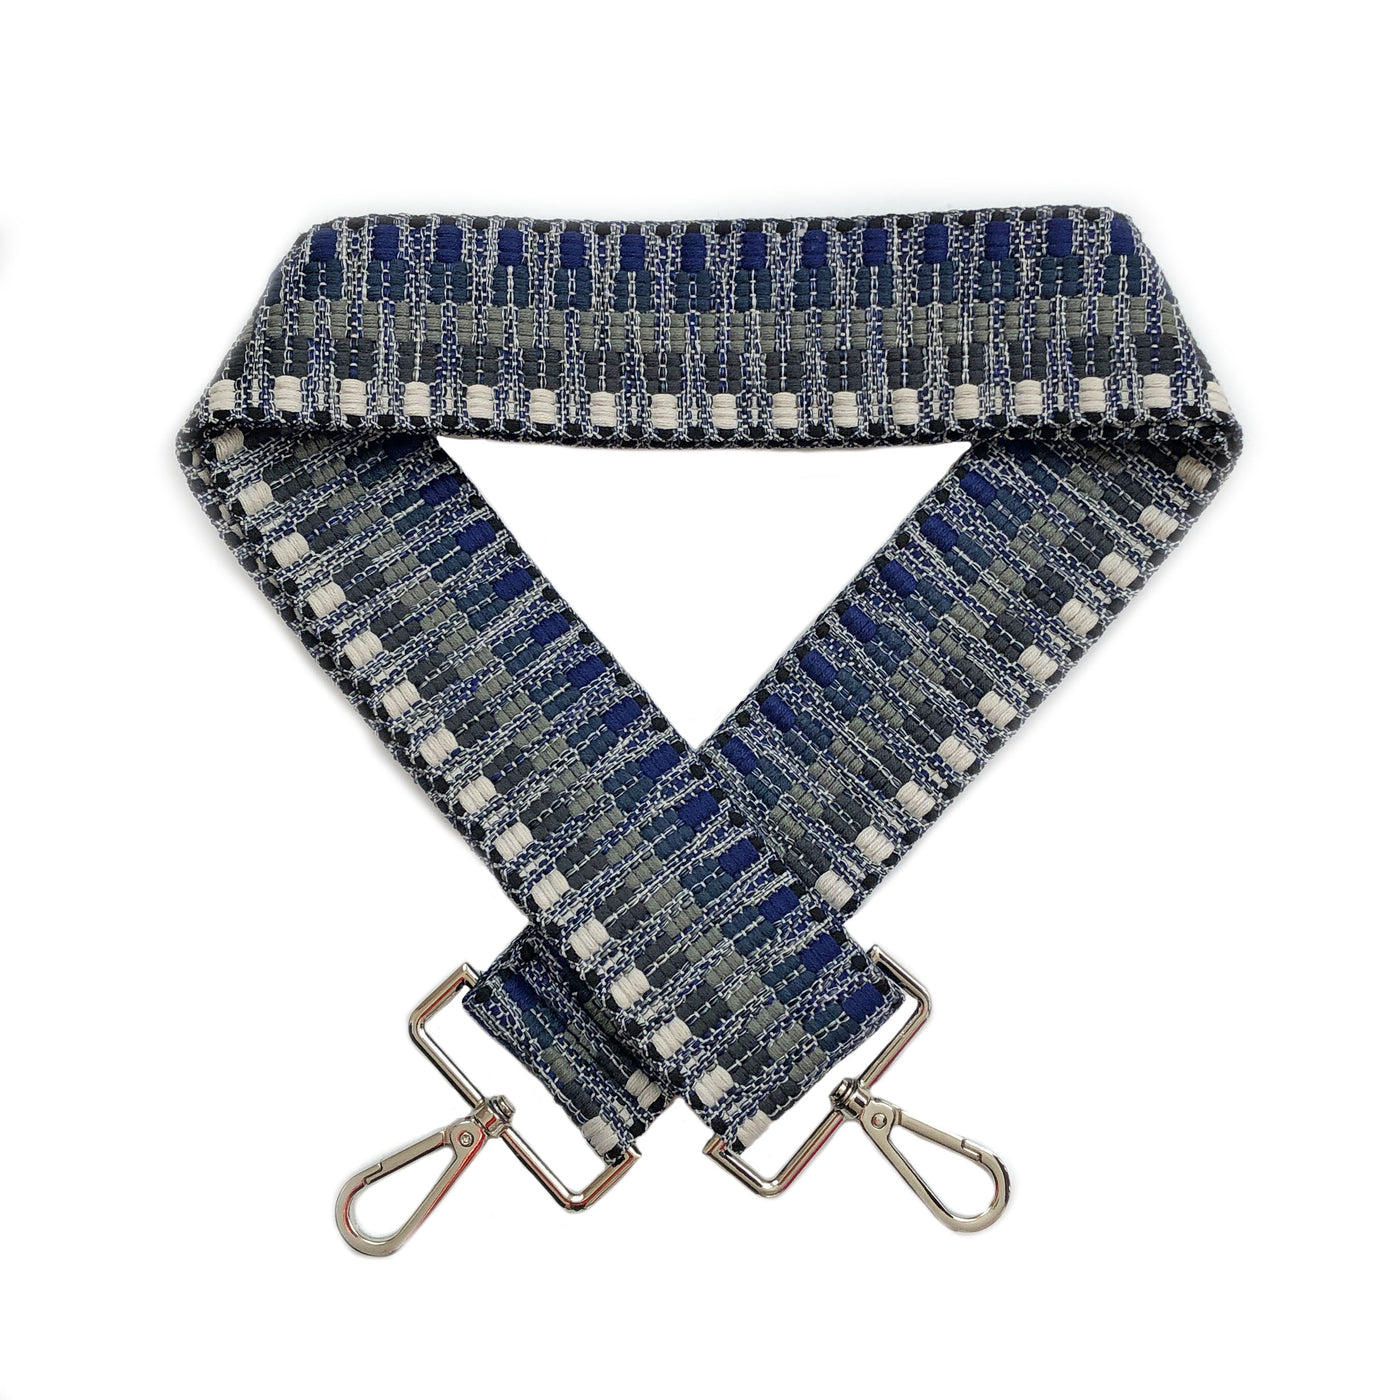 A navy blue, grey and off-white geometric patterned woven bag strap with silver metal buckles, shown laying on a plain white background.